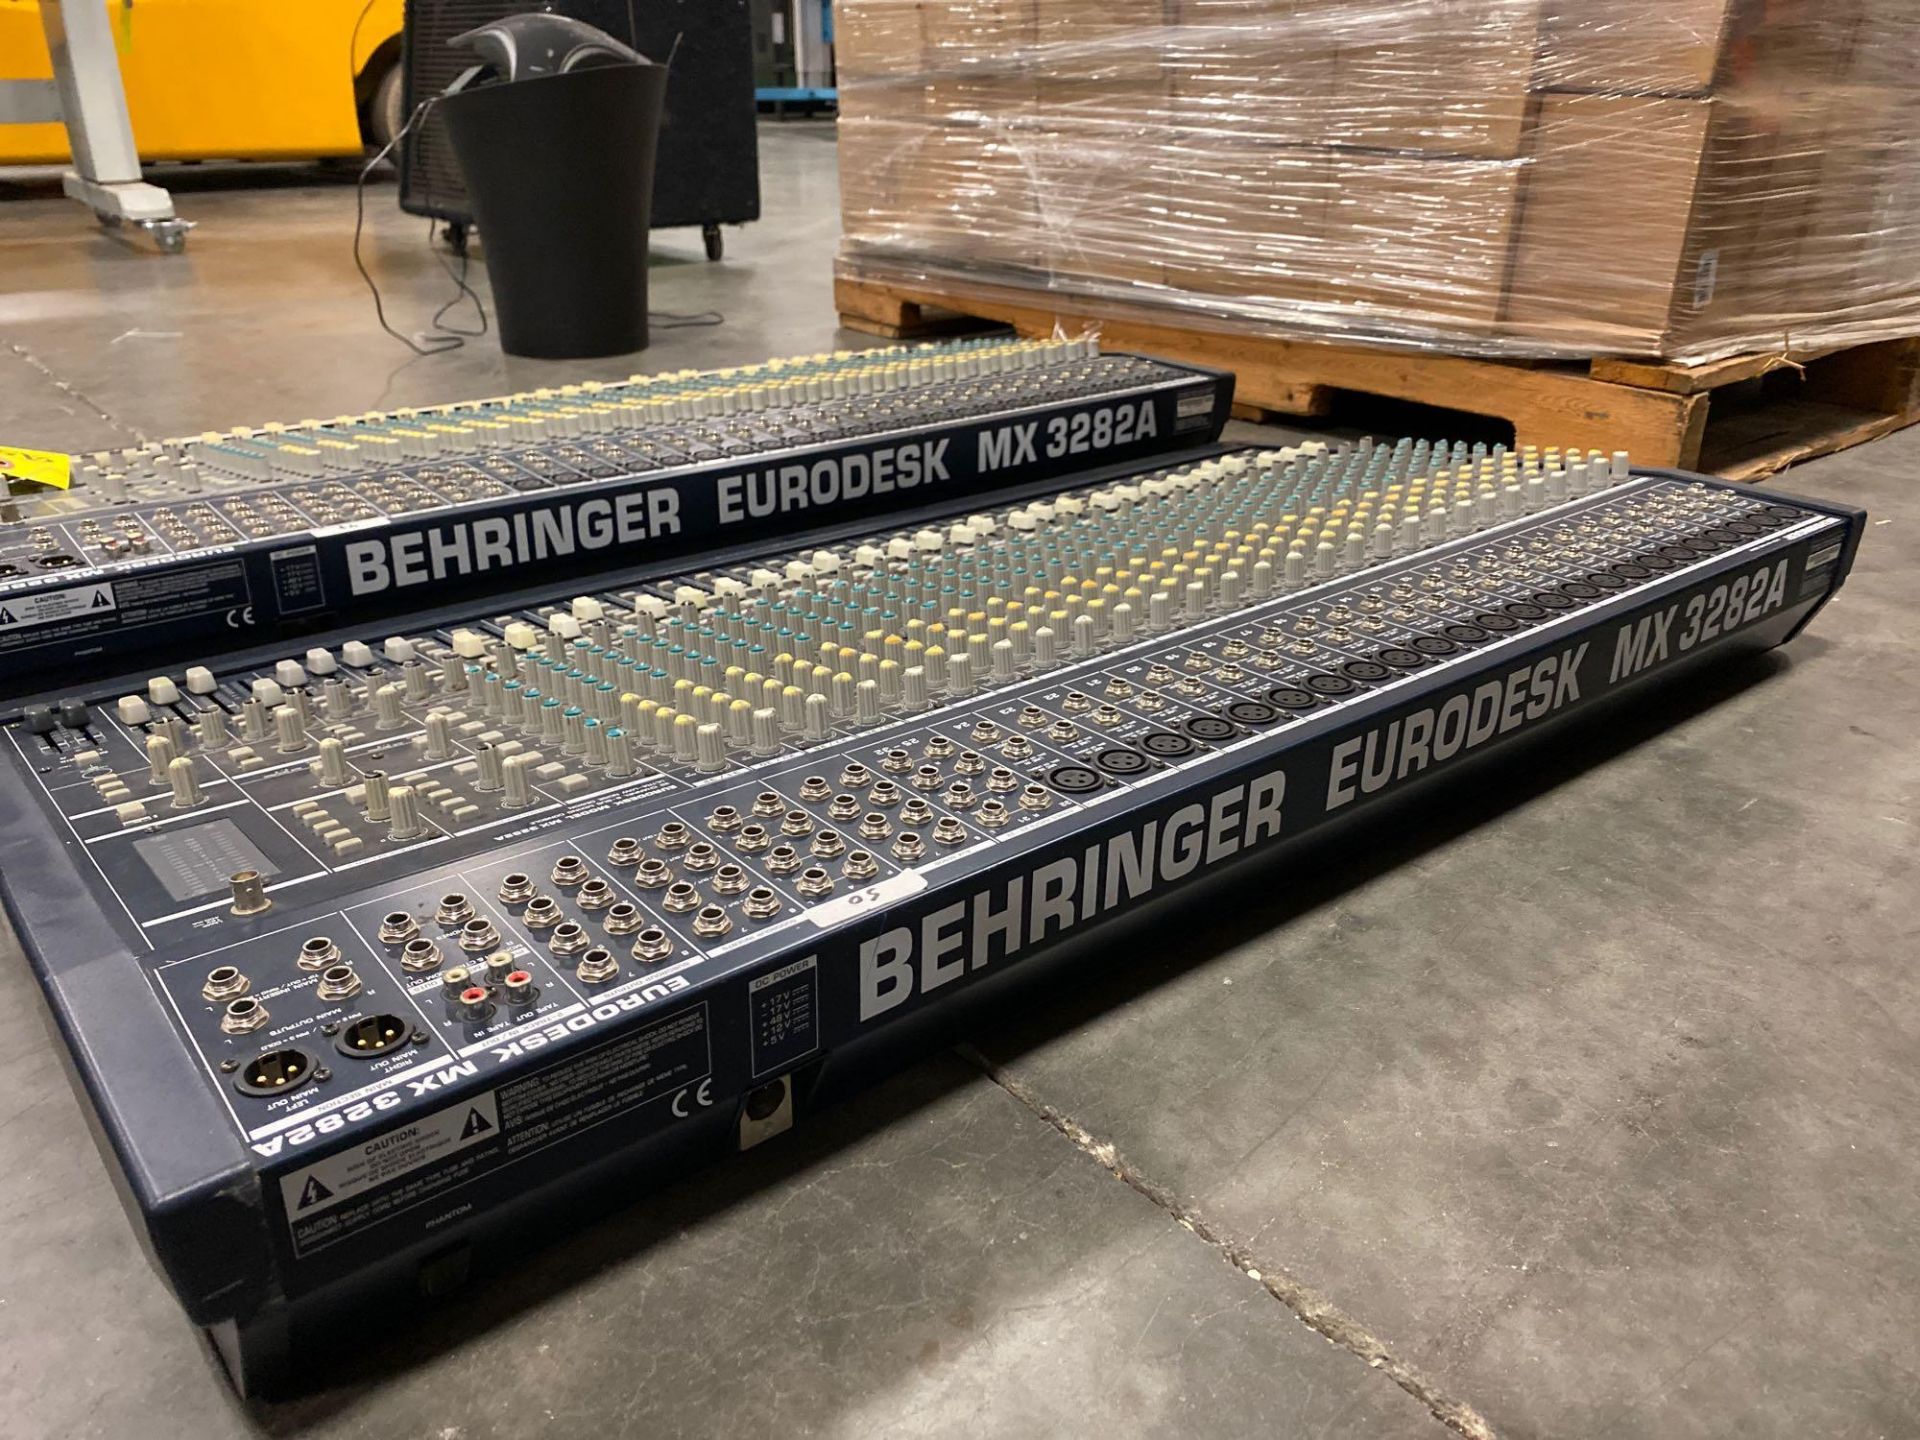 TWO BERINGER EURODESK MX 3282A MIXING BOARDS - Image 4 of 5